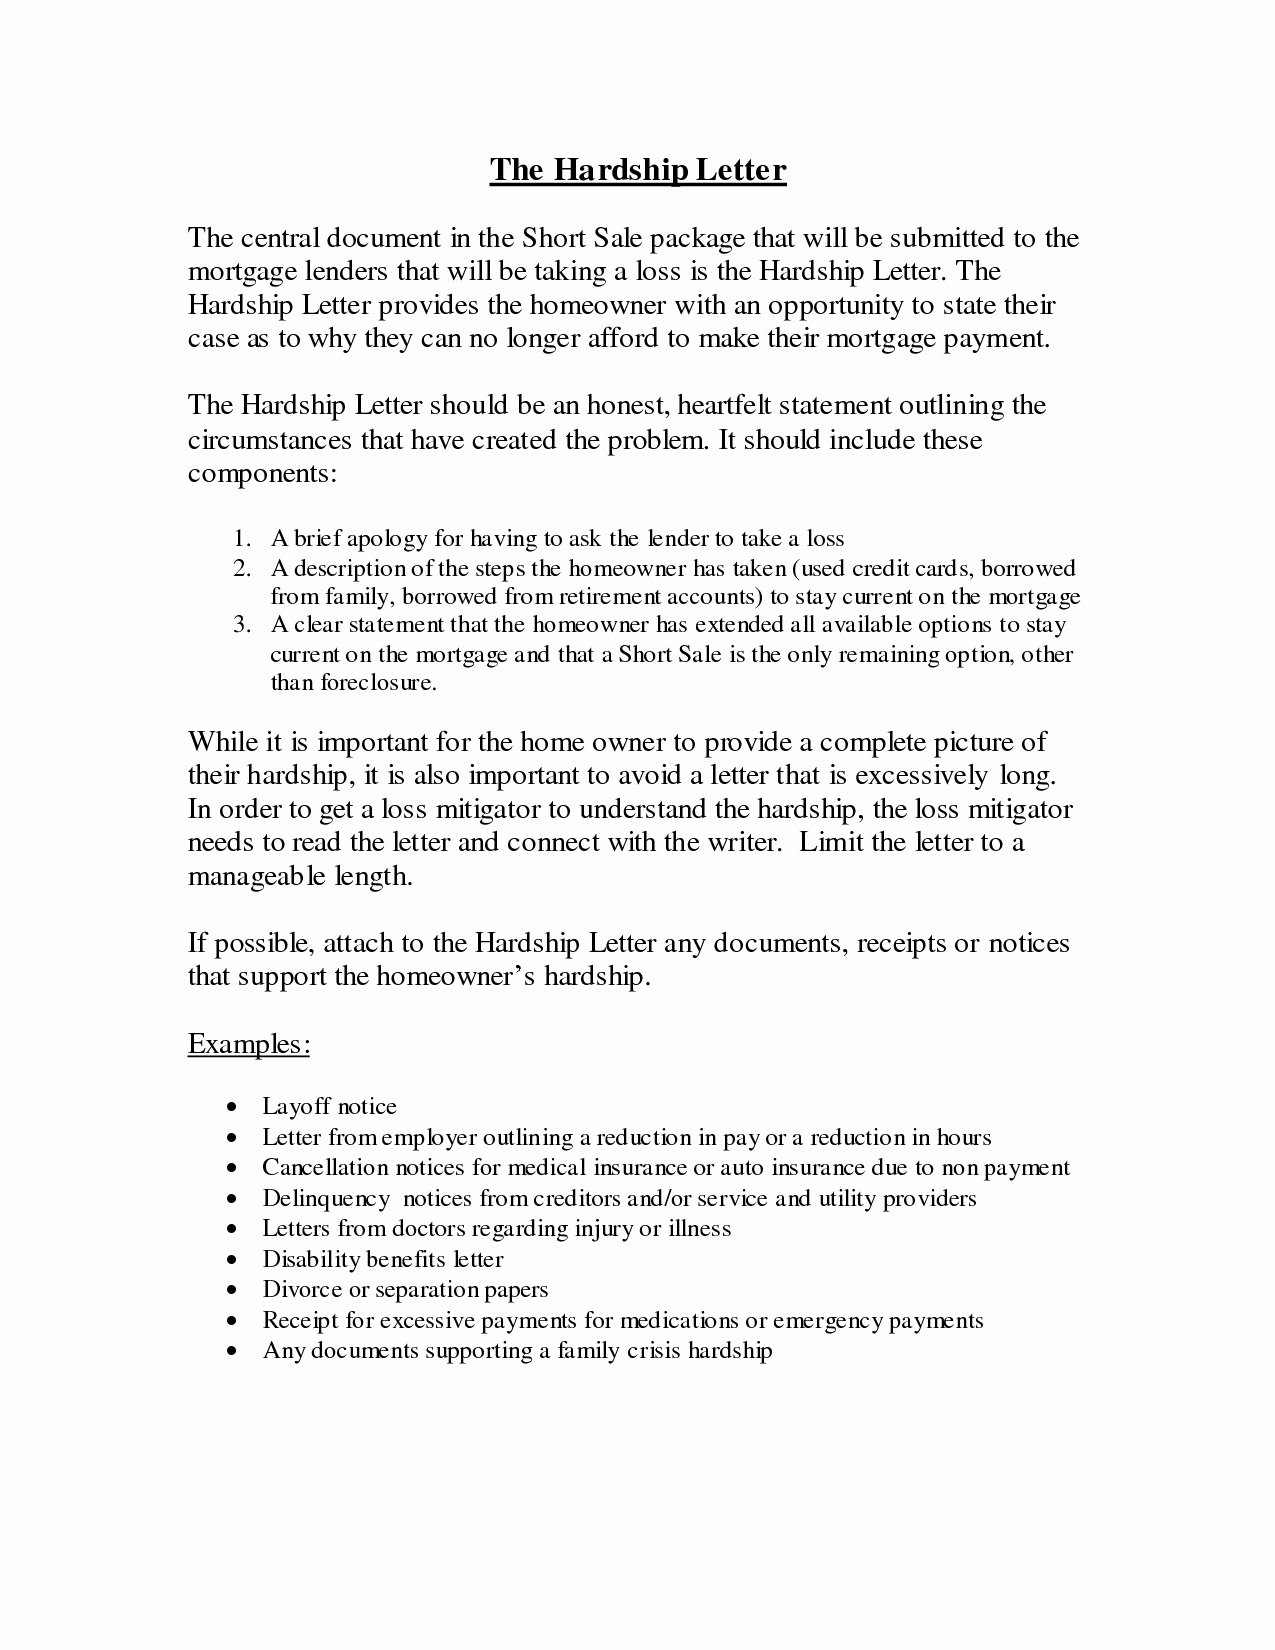 Immigration Hardship Letter Template - How to Write A Hardship Letter for Immigration for A Friend Unique